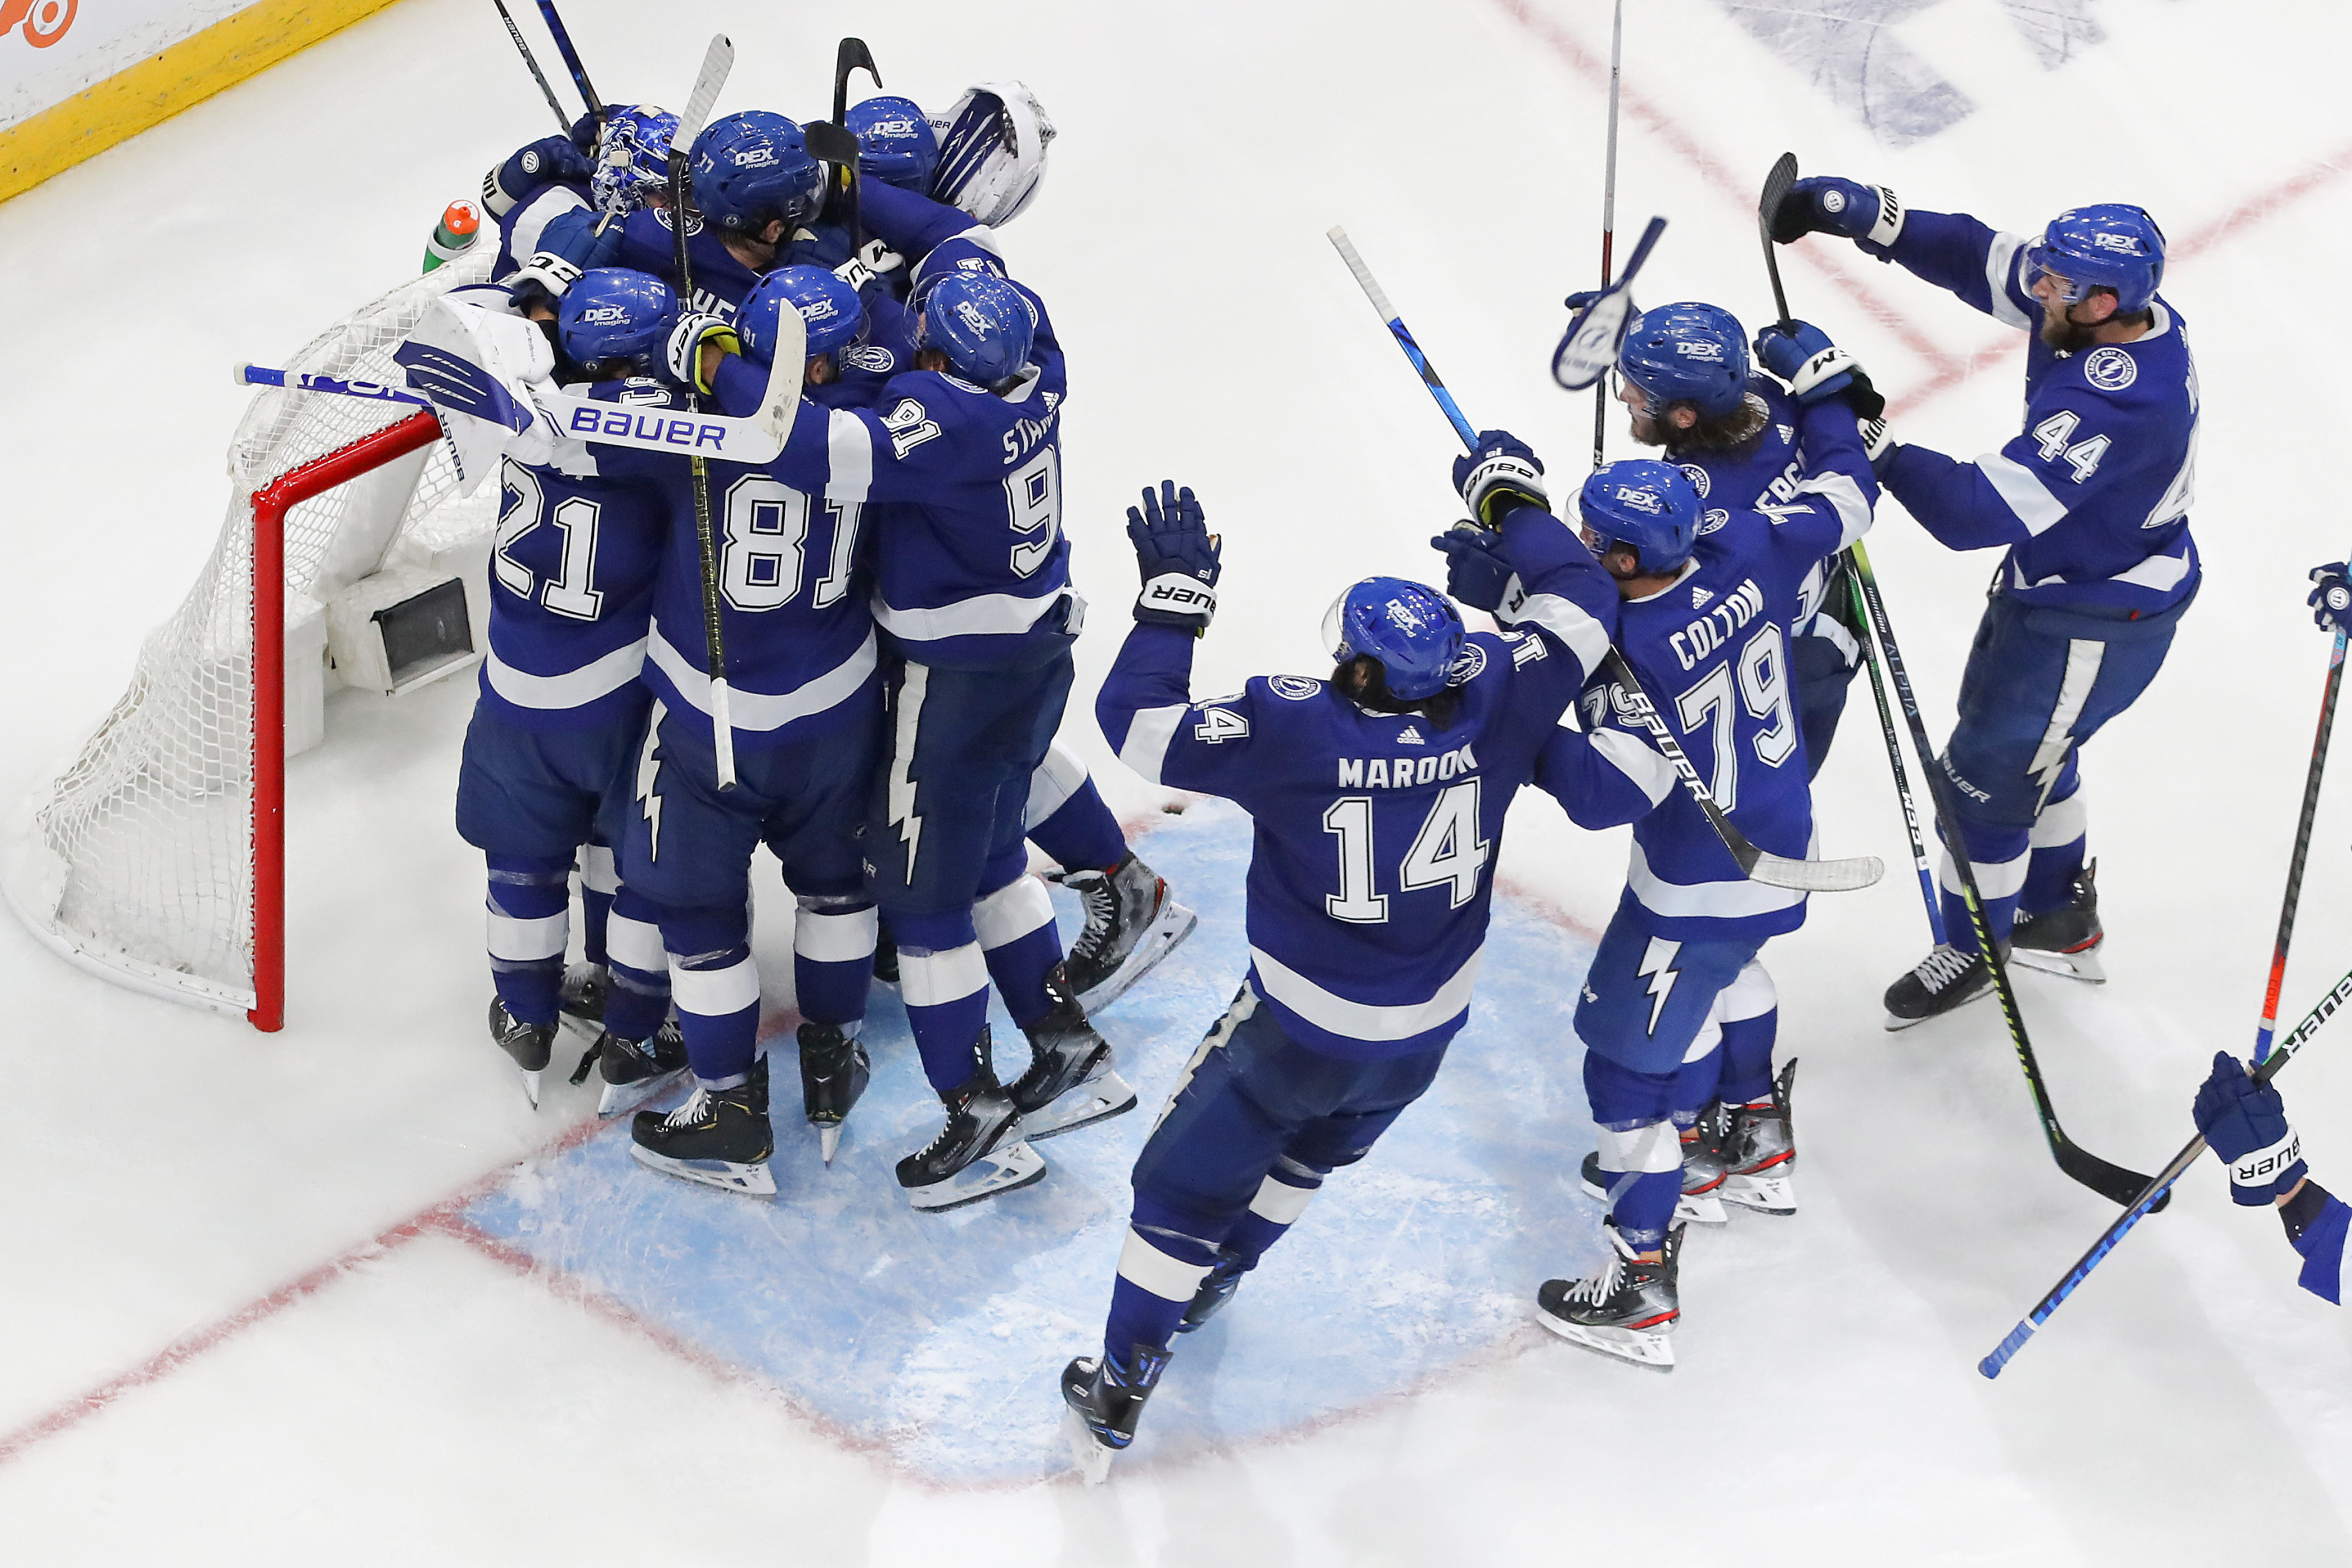 NHL: Stanley Cup 2021 Champions - Tampa Bay Lightning